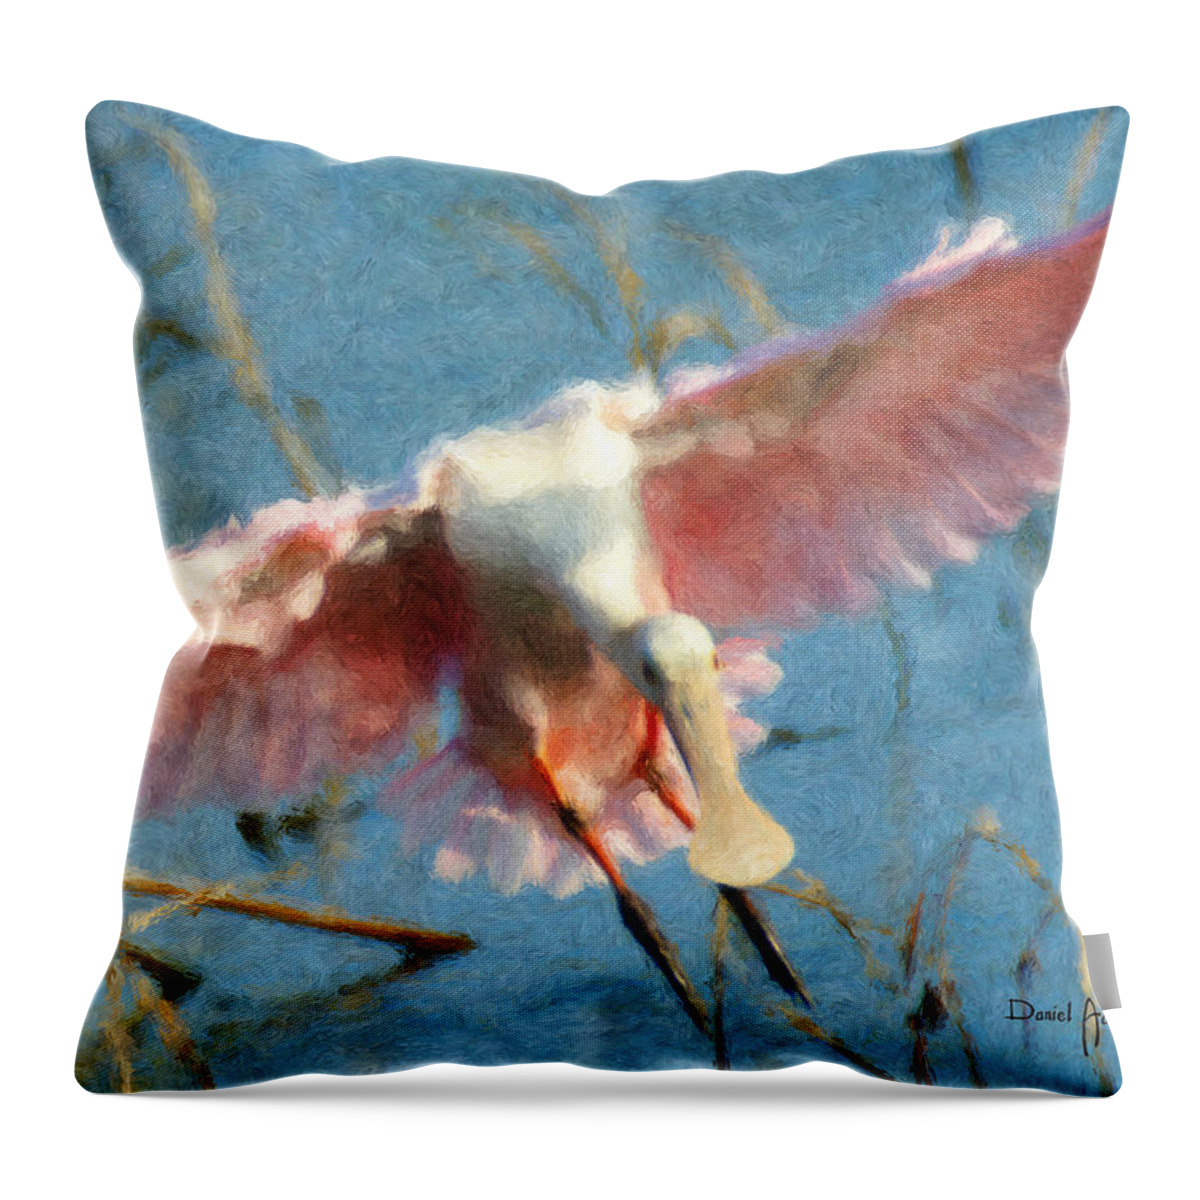 Roseate Spoonbill Throw Pillow featuring the painting Roseate Spoonbill by Daniel Adams